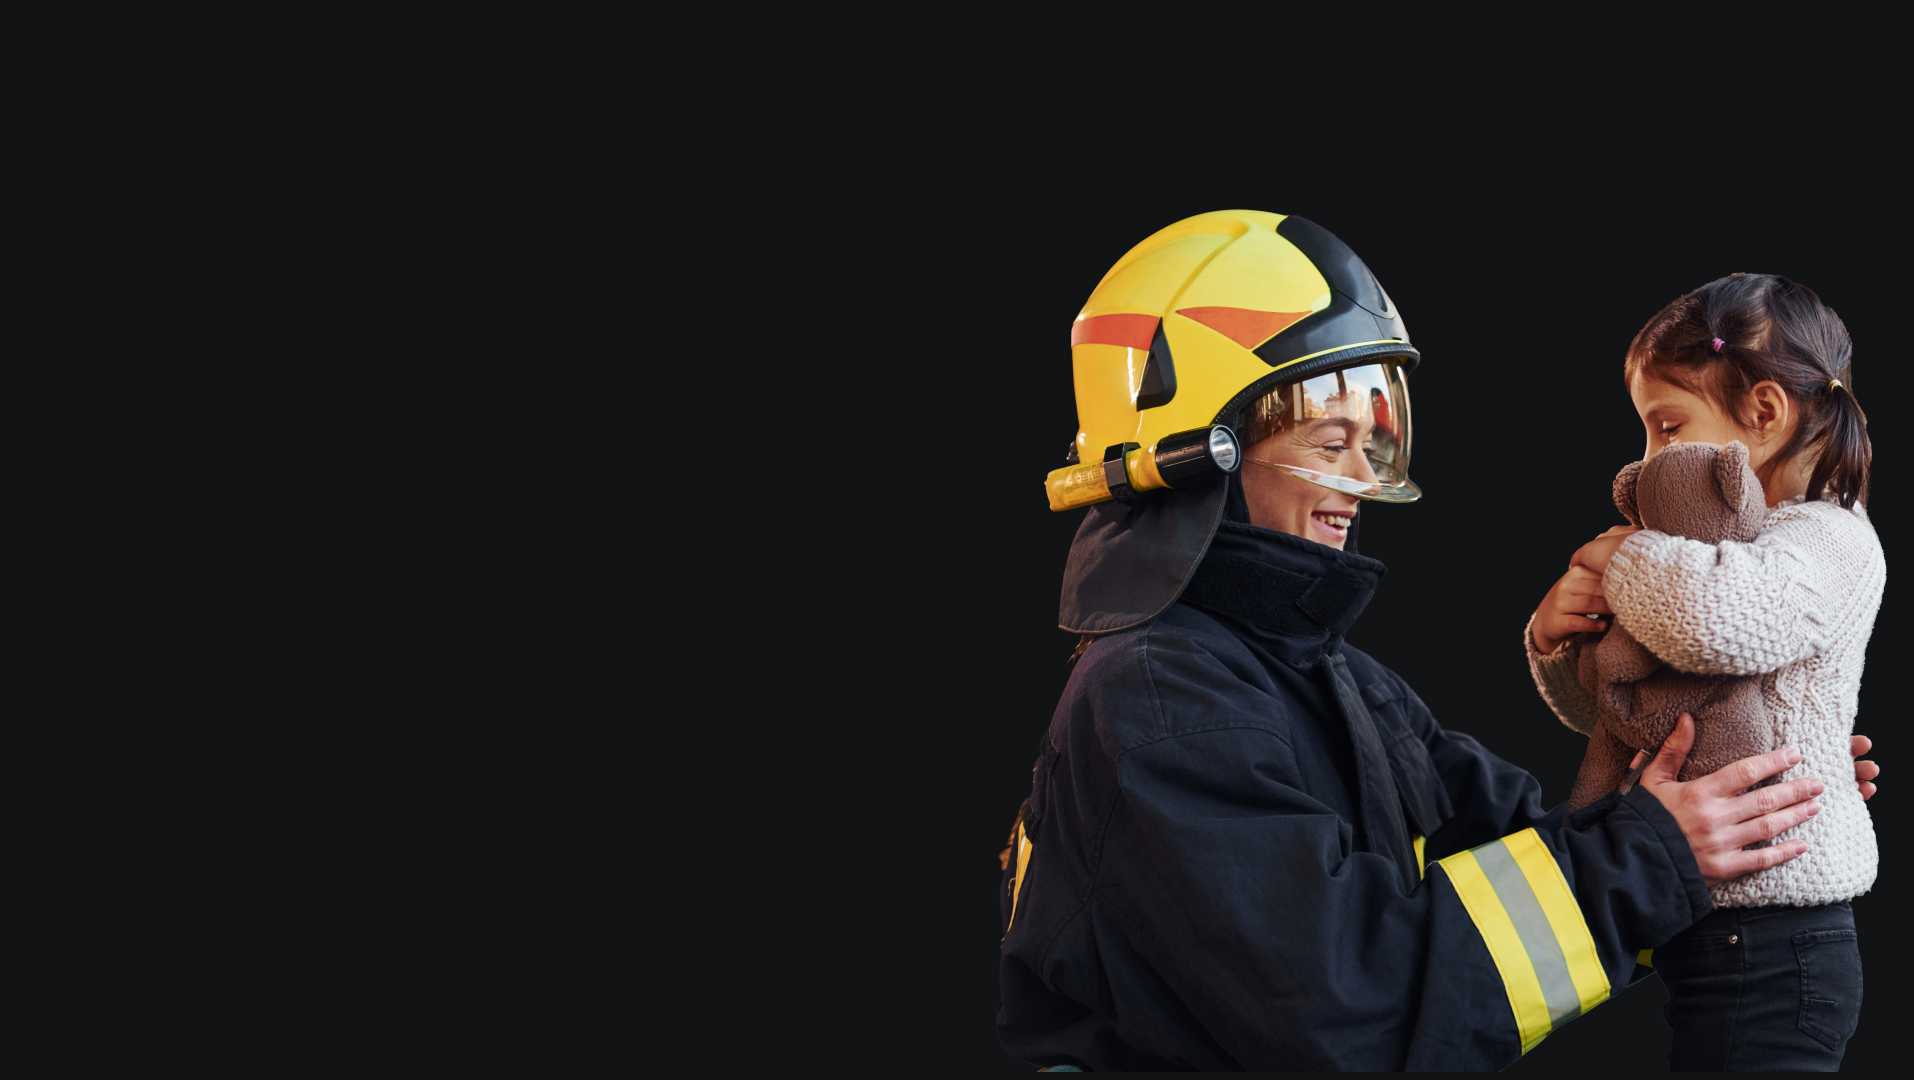 Firefighter woman with a child